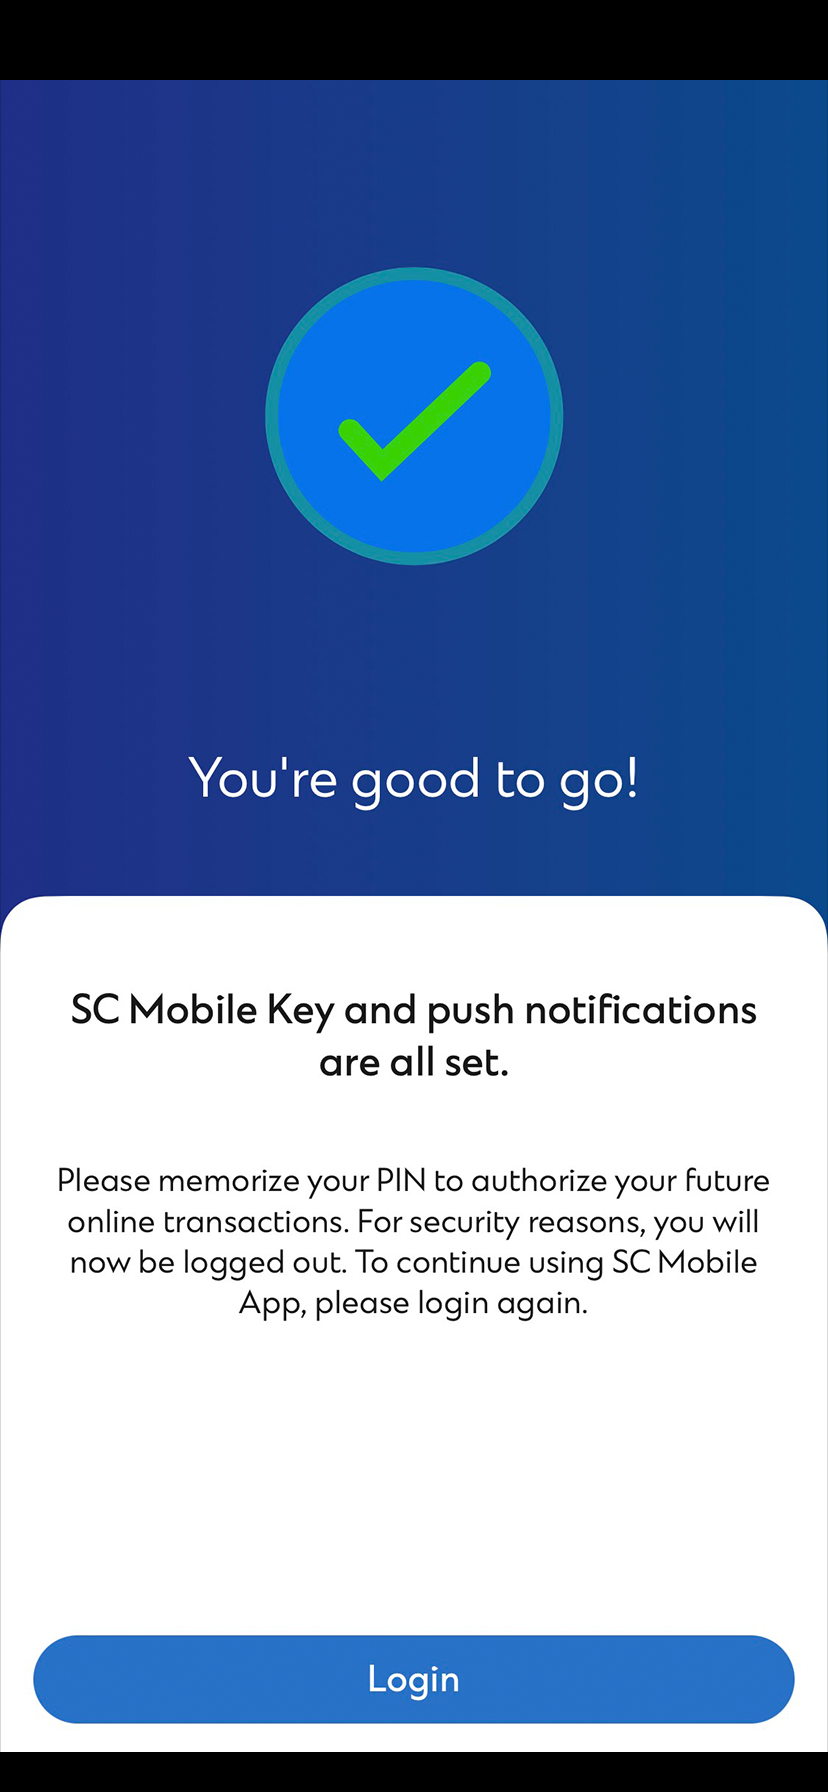 New to SC Mobile on Activate Push Notification in one go during SC Mobile Key registration Step 7